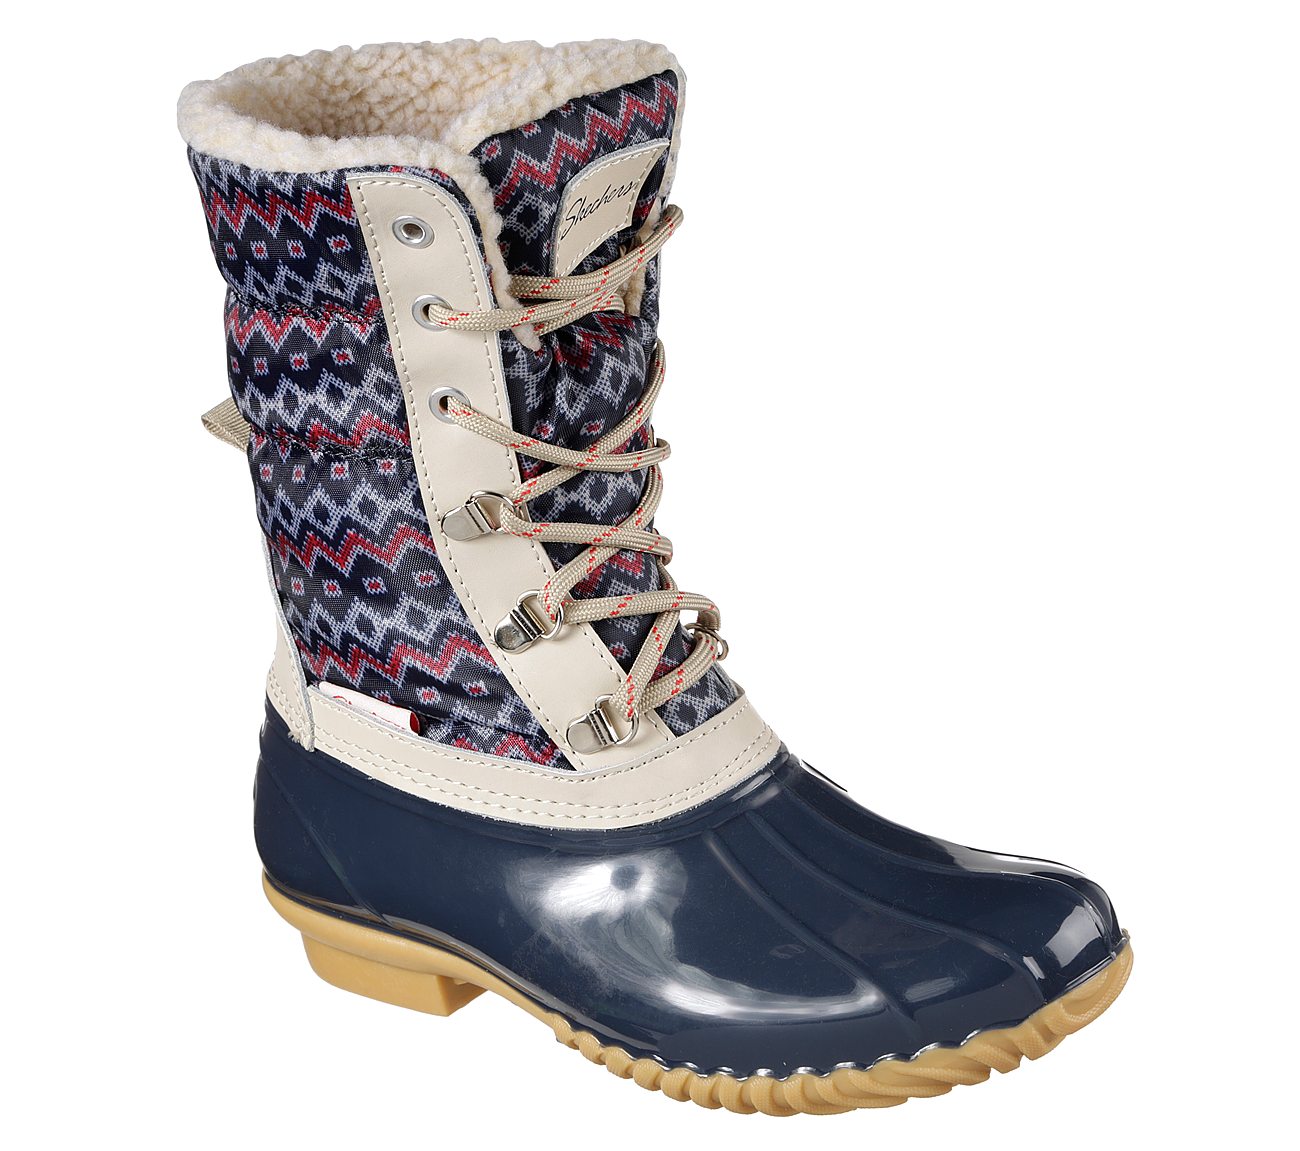 skechers hampshire boots